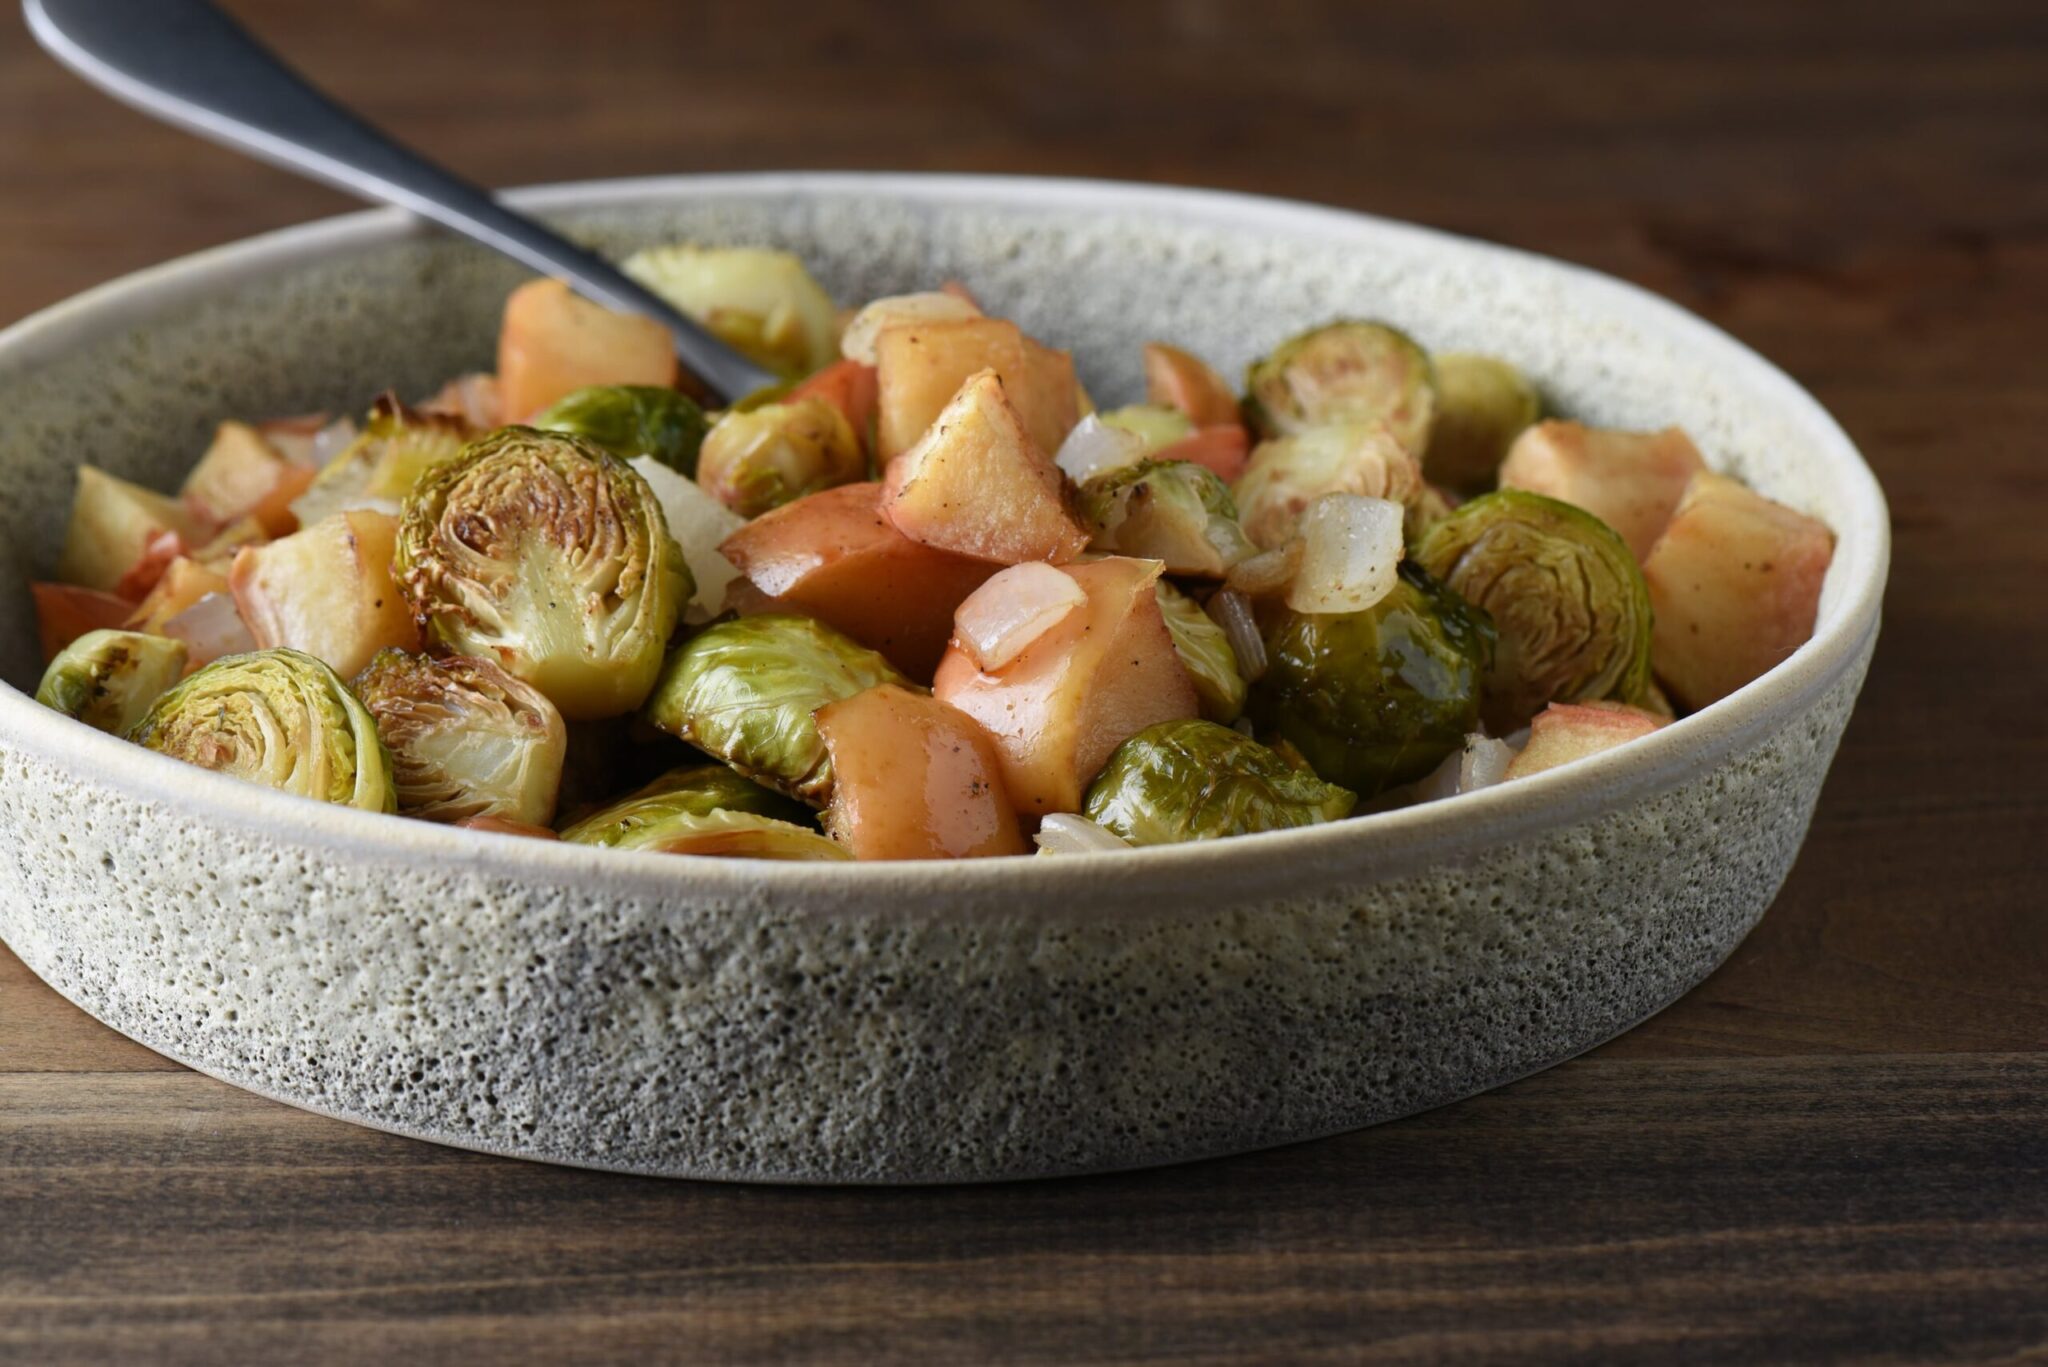 Roasted Apples & Brussels Sprouts